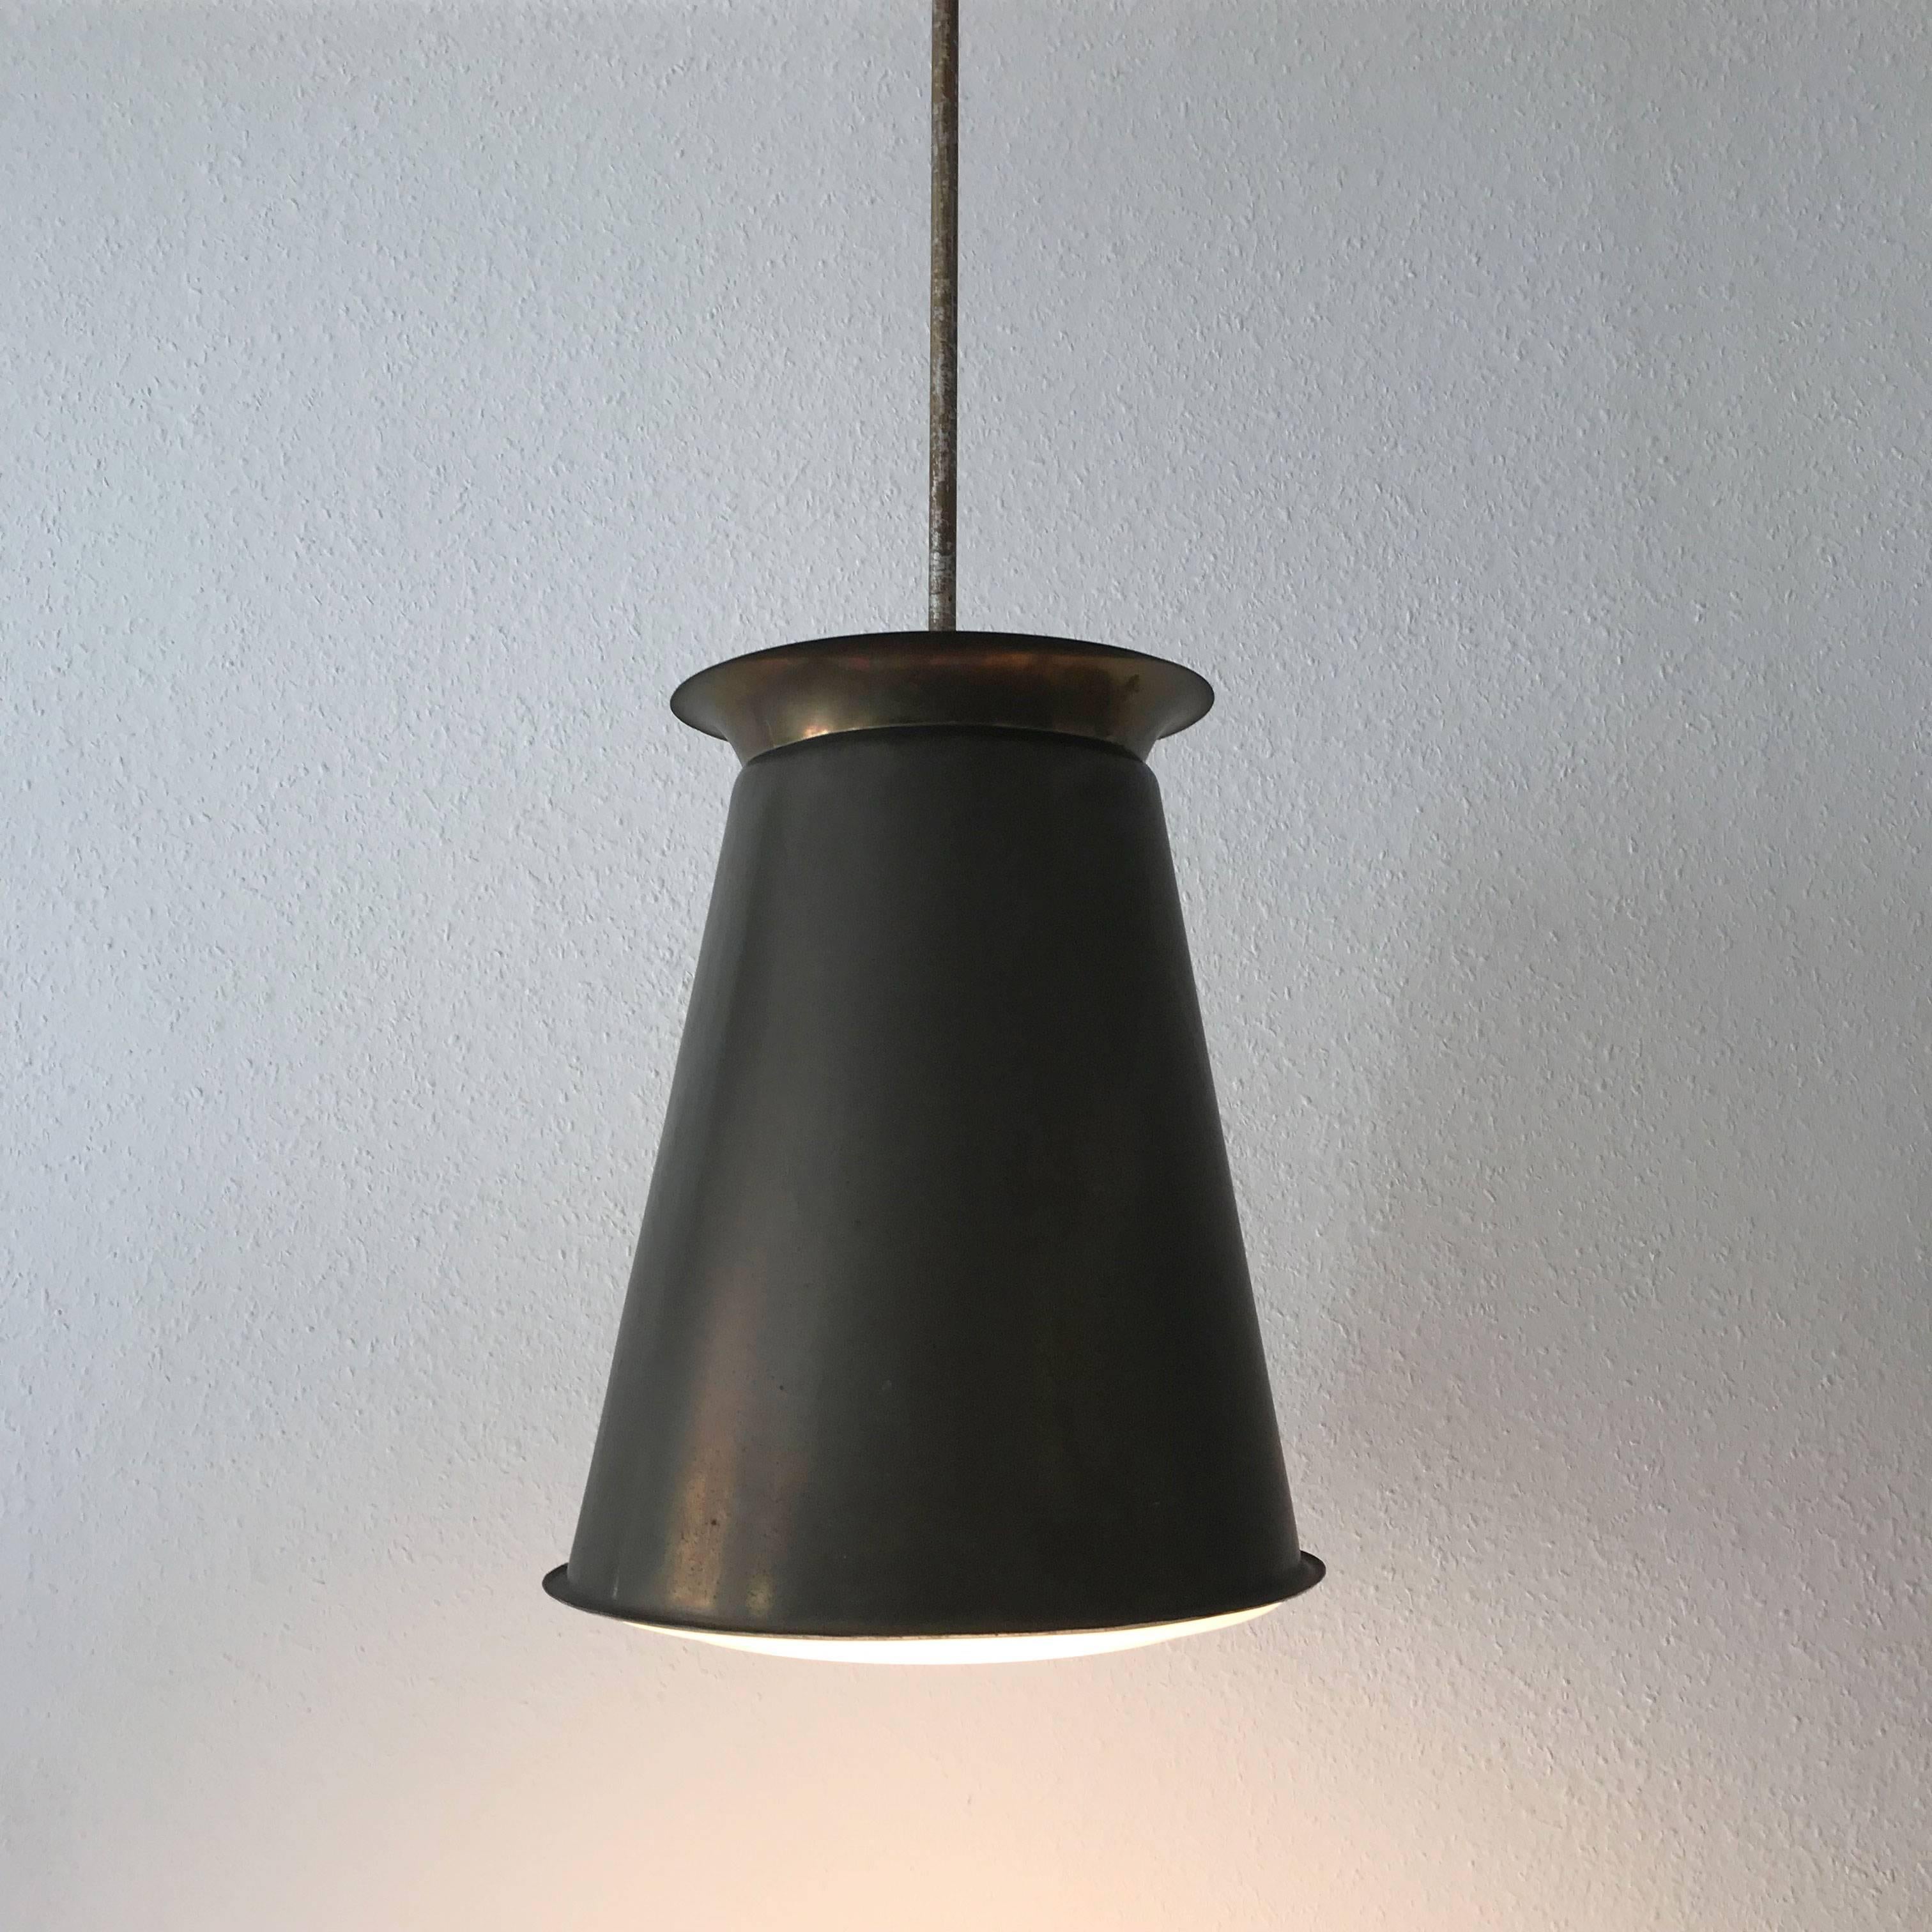 Metal Exceptional Bauhaus Pendant Lamp by Adolf Meyer for Zeiss Ikon, 1930s, Germany For Sale